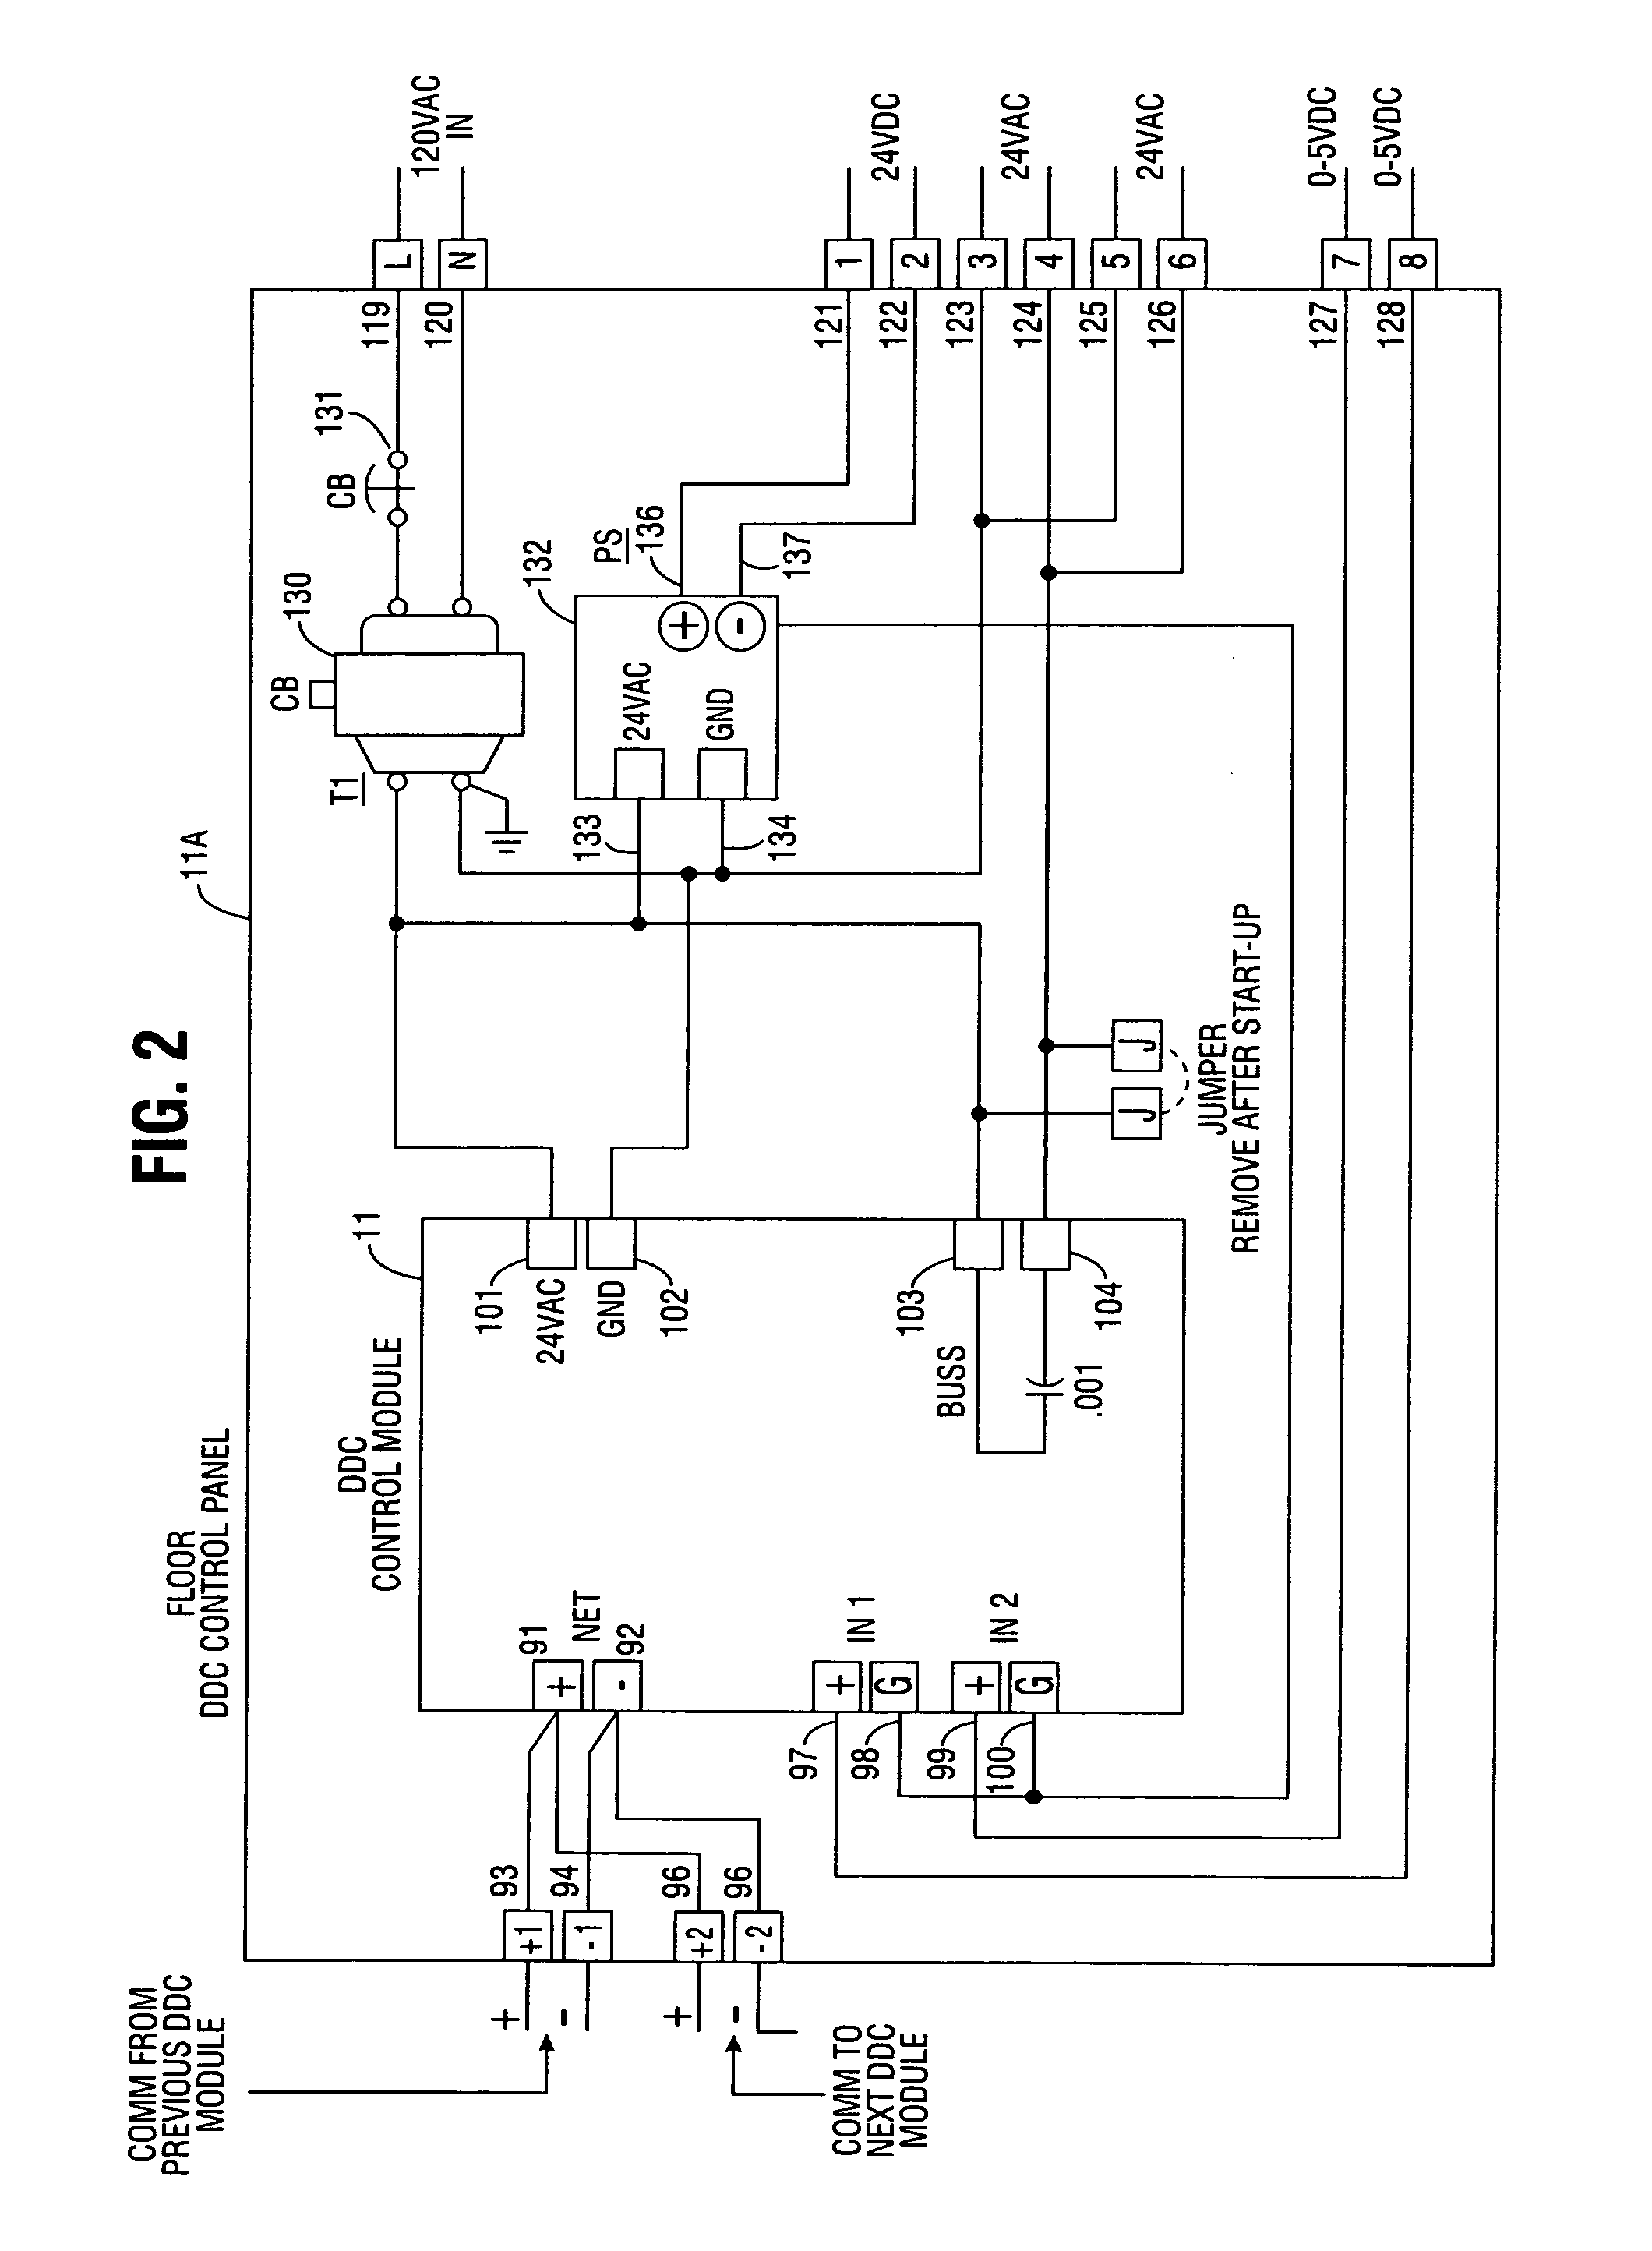 Water leak detection and shut-off method and apparatus using differential flow rate sensors